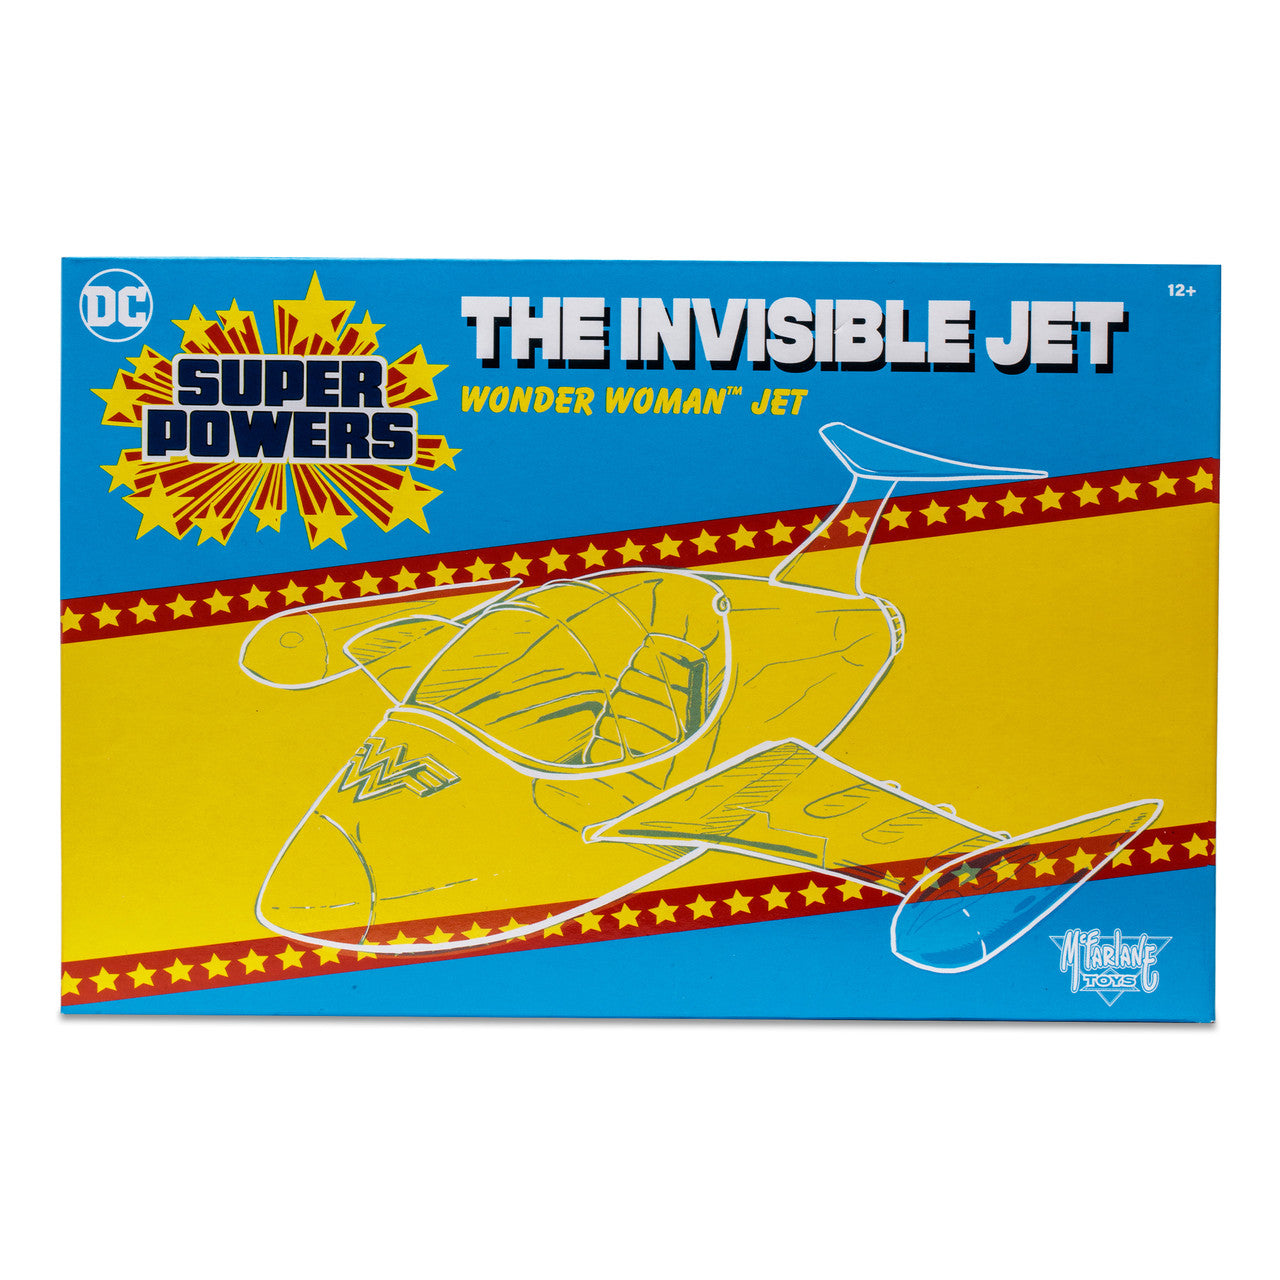 DC Super Powers The Invisible Jet